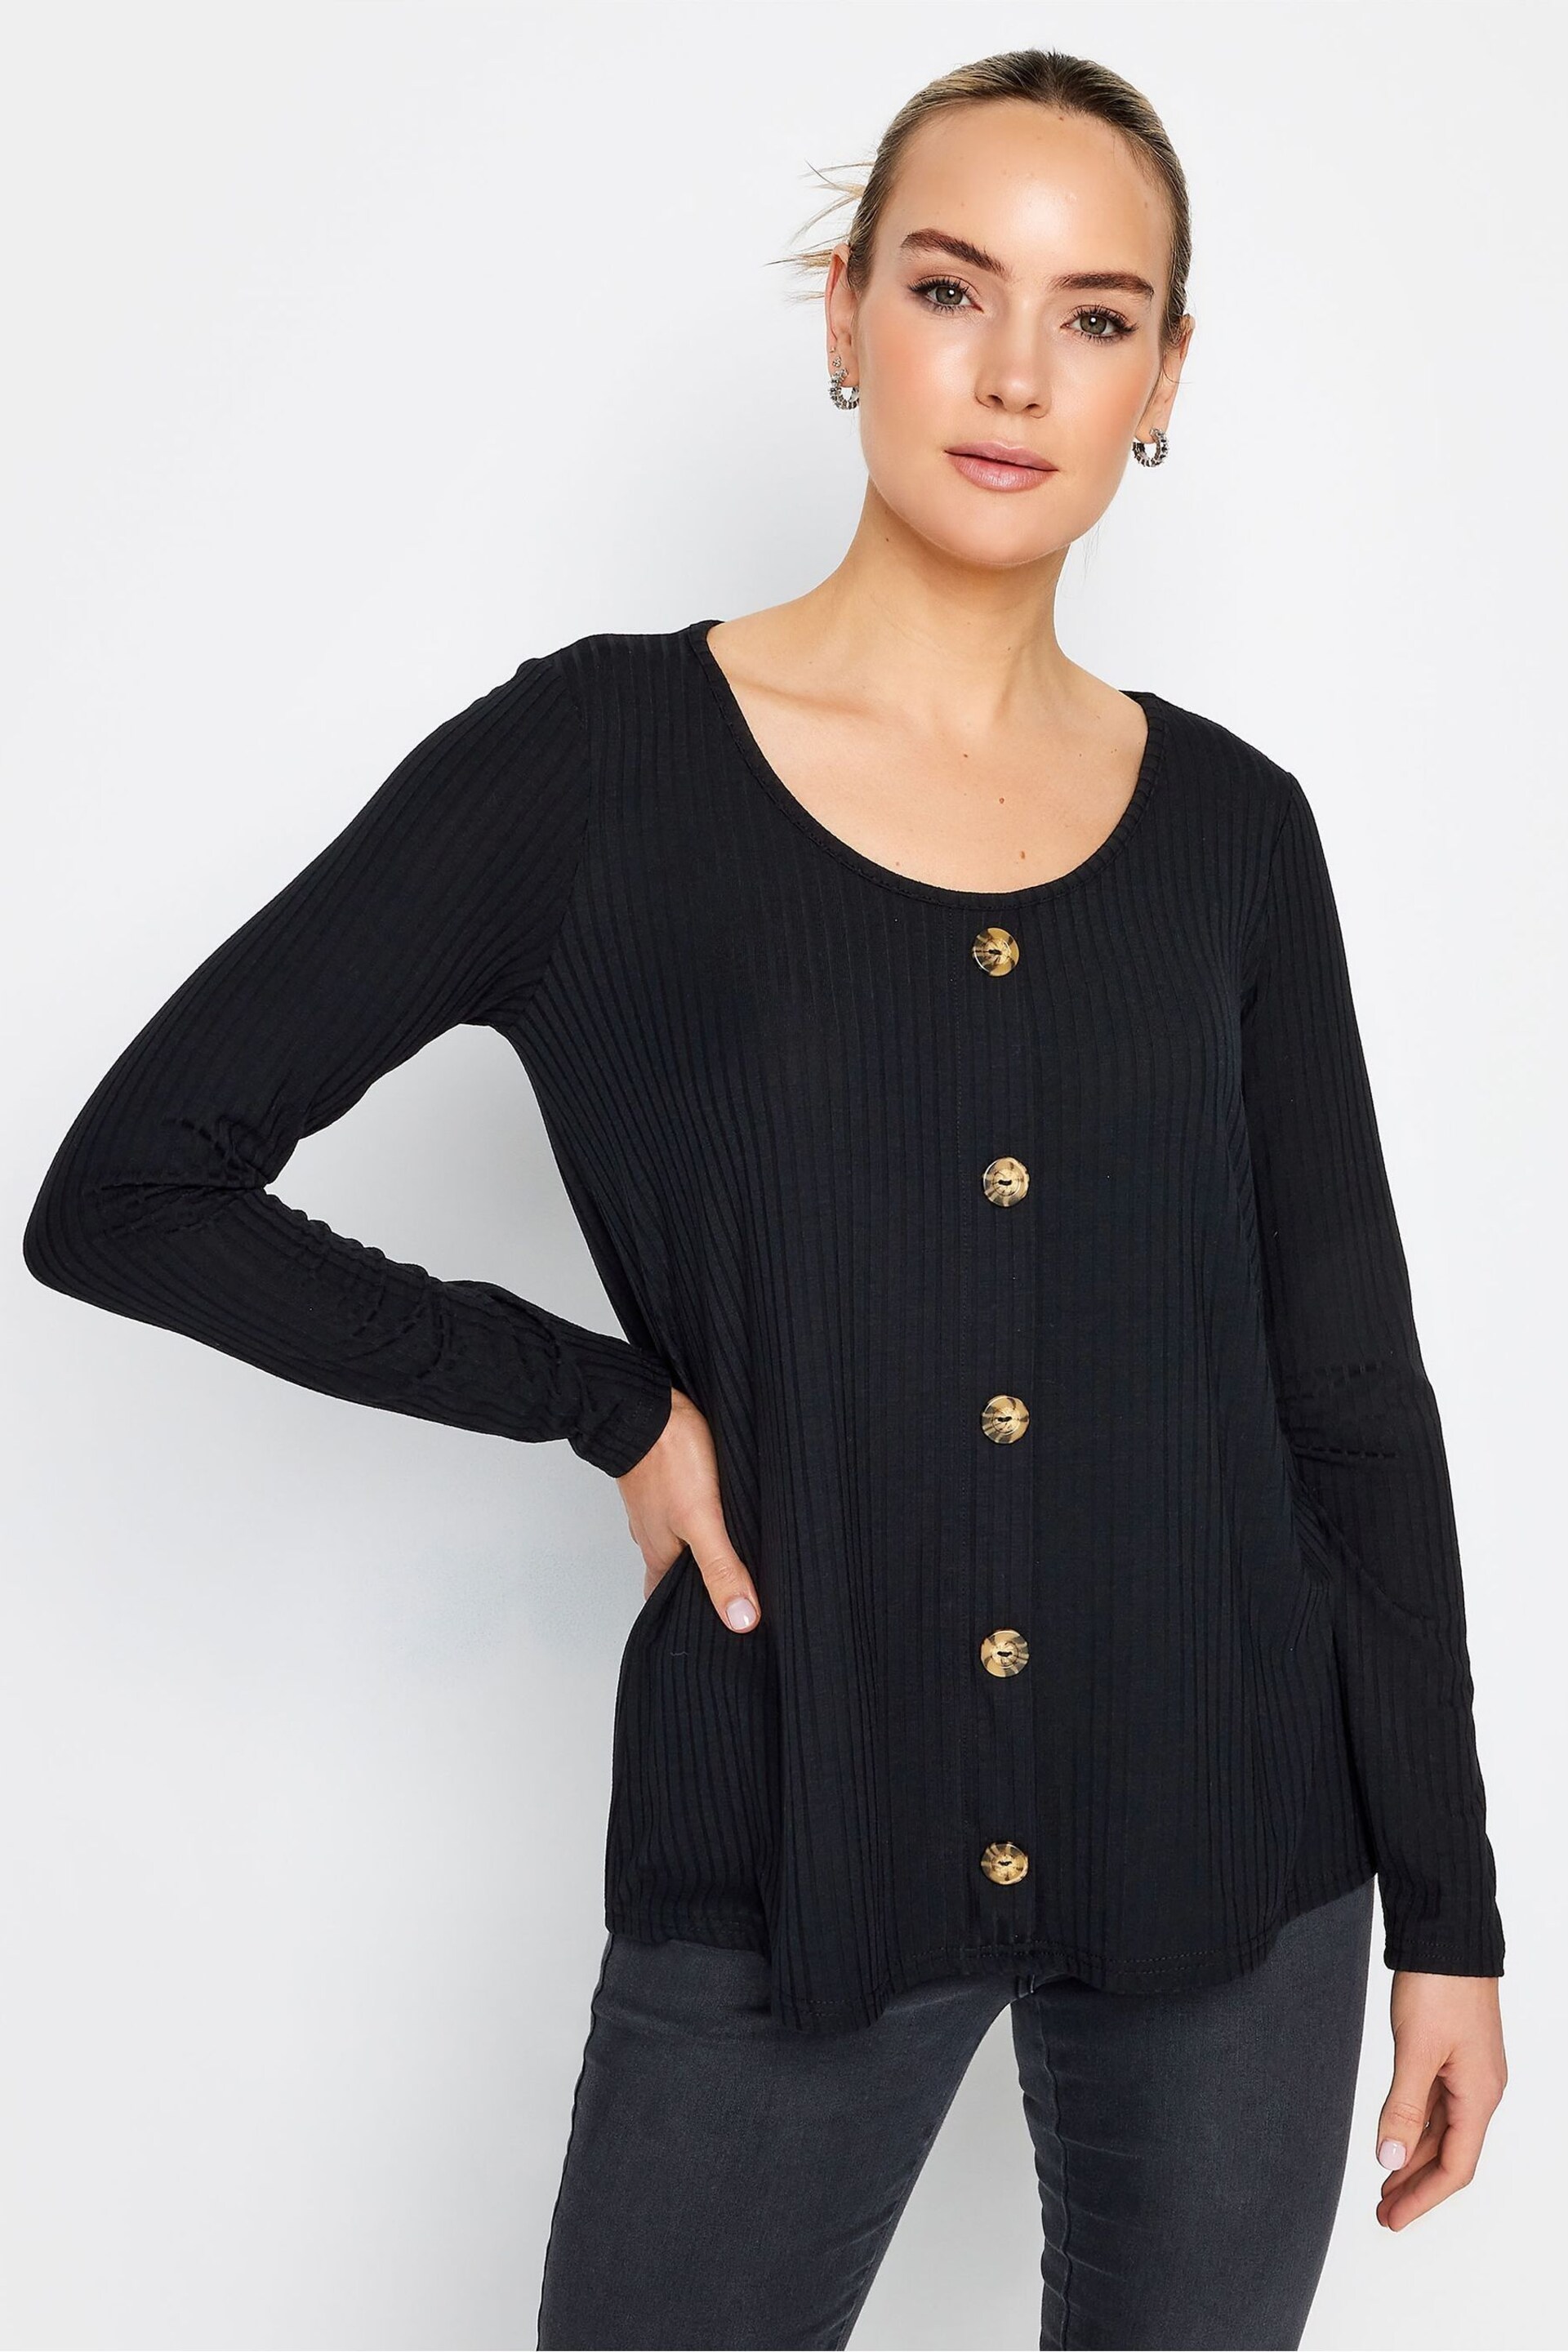 Long Tall Sally Black Scoop Long Sleeve Button Top - Image 1 of 5